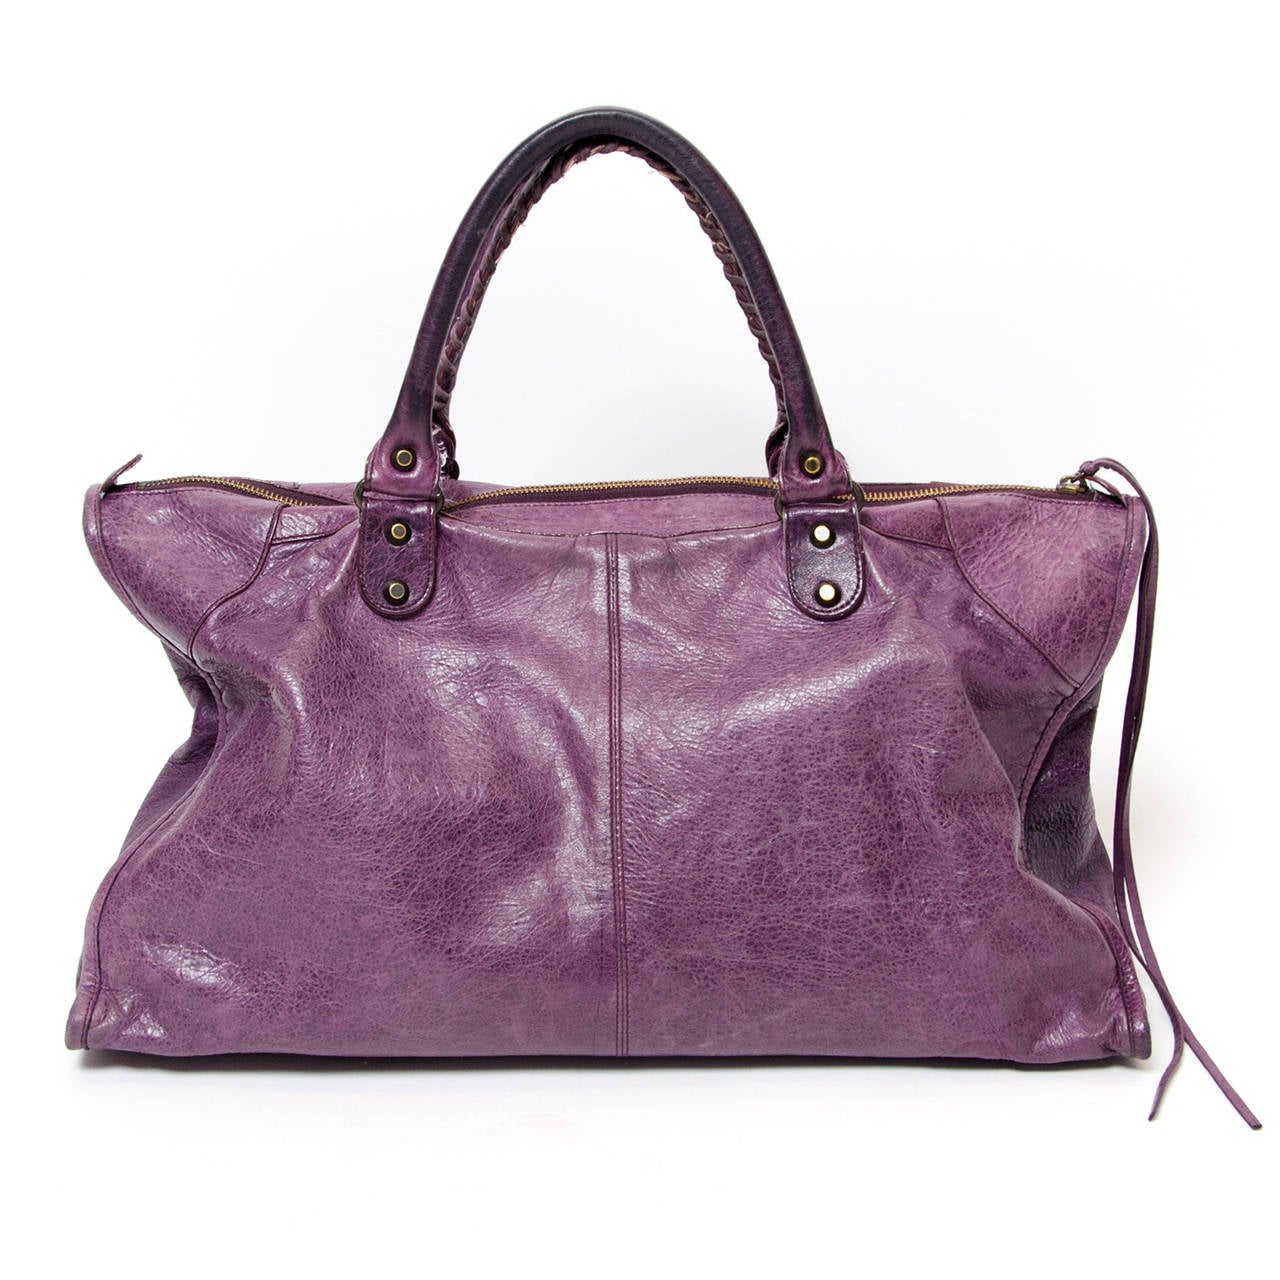 Purple Balenciaga Classic work bag. The iconic moto inspired design elements are all present in this incredible bag.